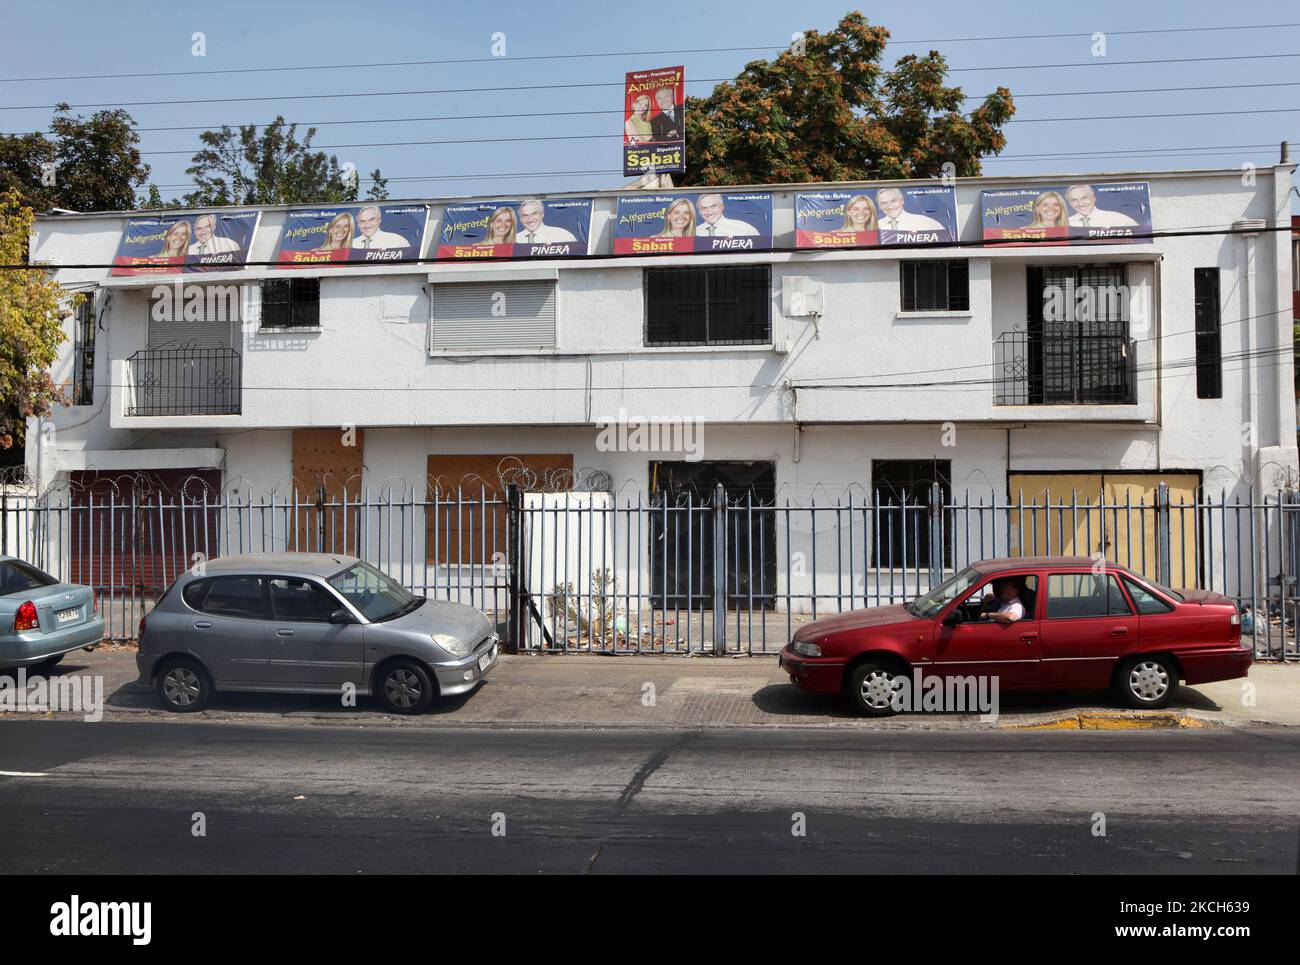 Election posters hang outside a political campaign office during the Chilean election sporting the faces of current Sebastian Pinera and Marcela Sabat in Santiago, Chile, on March 12, 2010. (Photo by Creative Touch Imaging Ltd./NurPhoto) Stock Photo